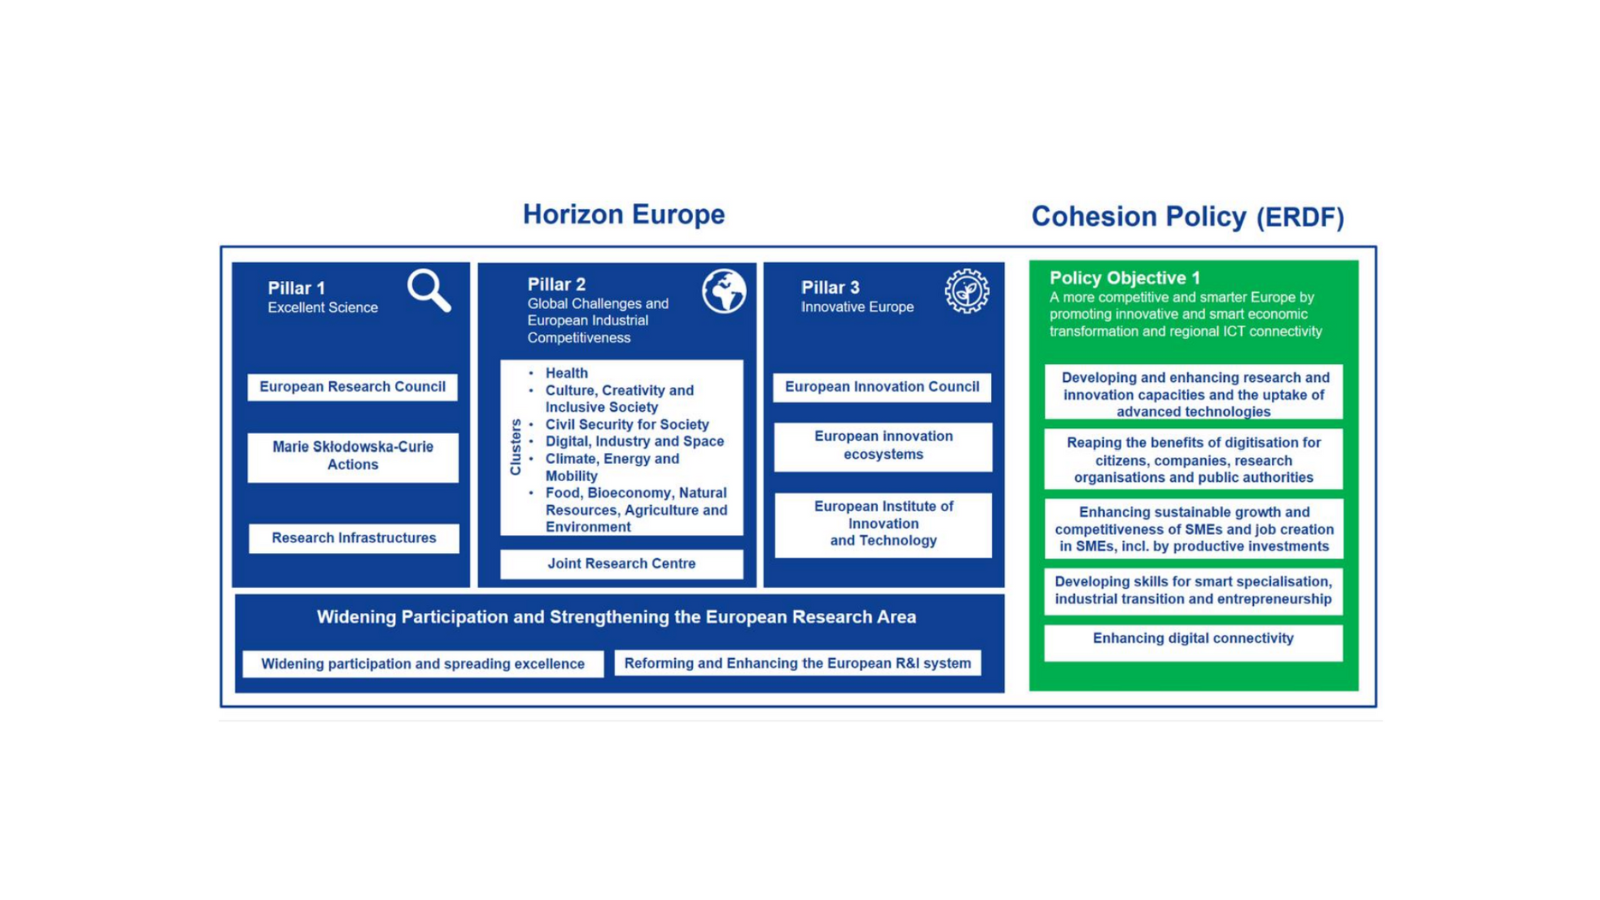 Guidance on synergies between Horizon Europe and ERDF is out